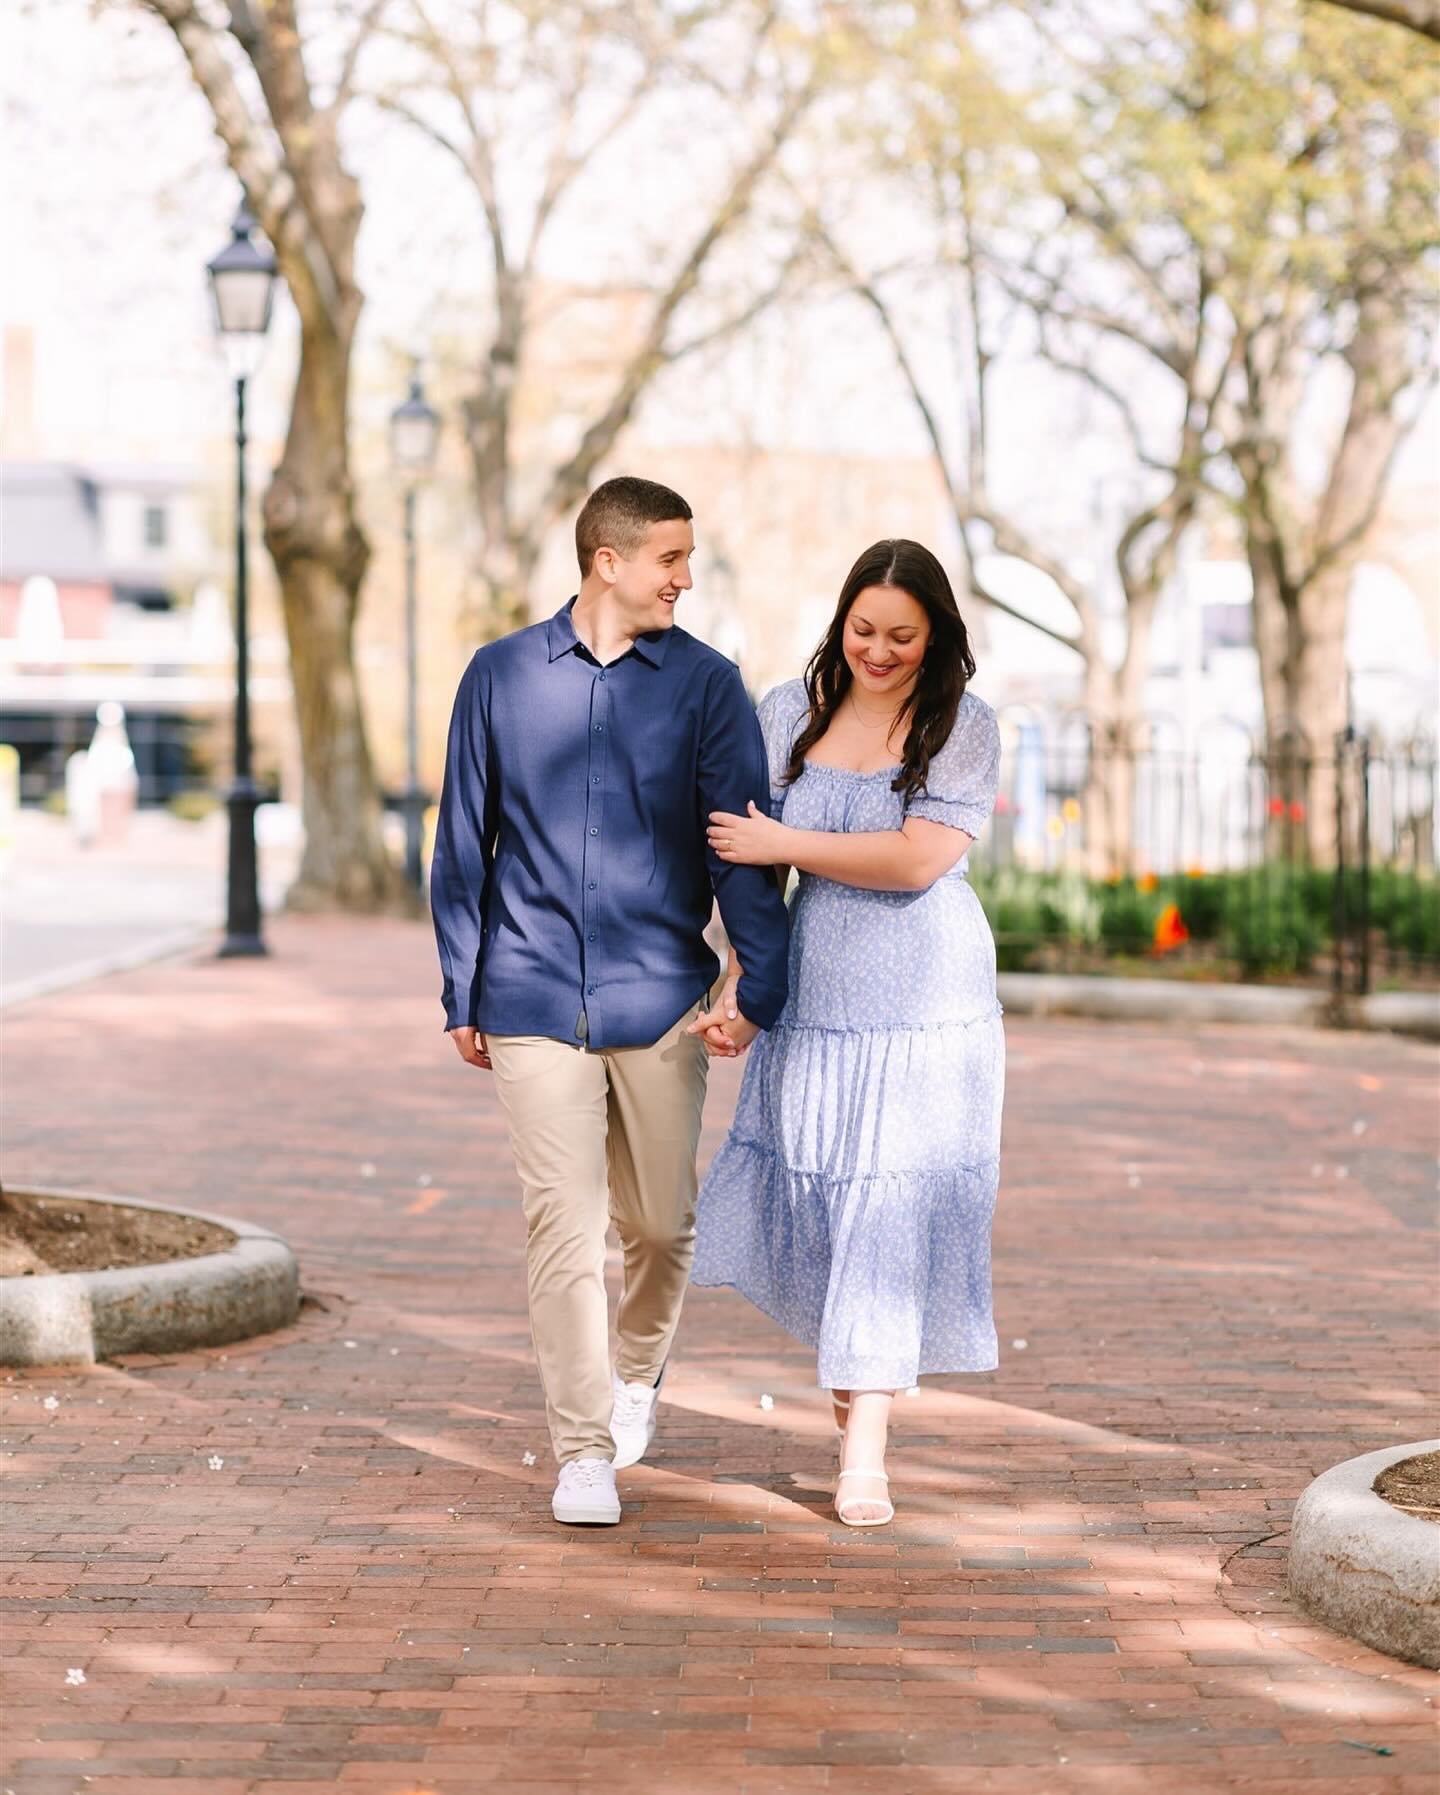 Lexi &amp; Pat had their early morning engagement session in downtown Newburyport this weekend. I&rsquo;m so excited to be working with them again in September for their intimate beach wedding 😊
.
.
.
.
.
#bostonengagementphotographer #maengagementp